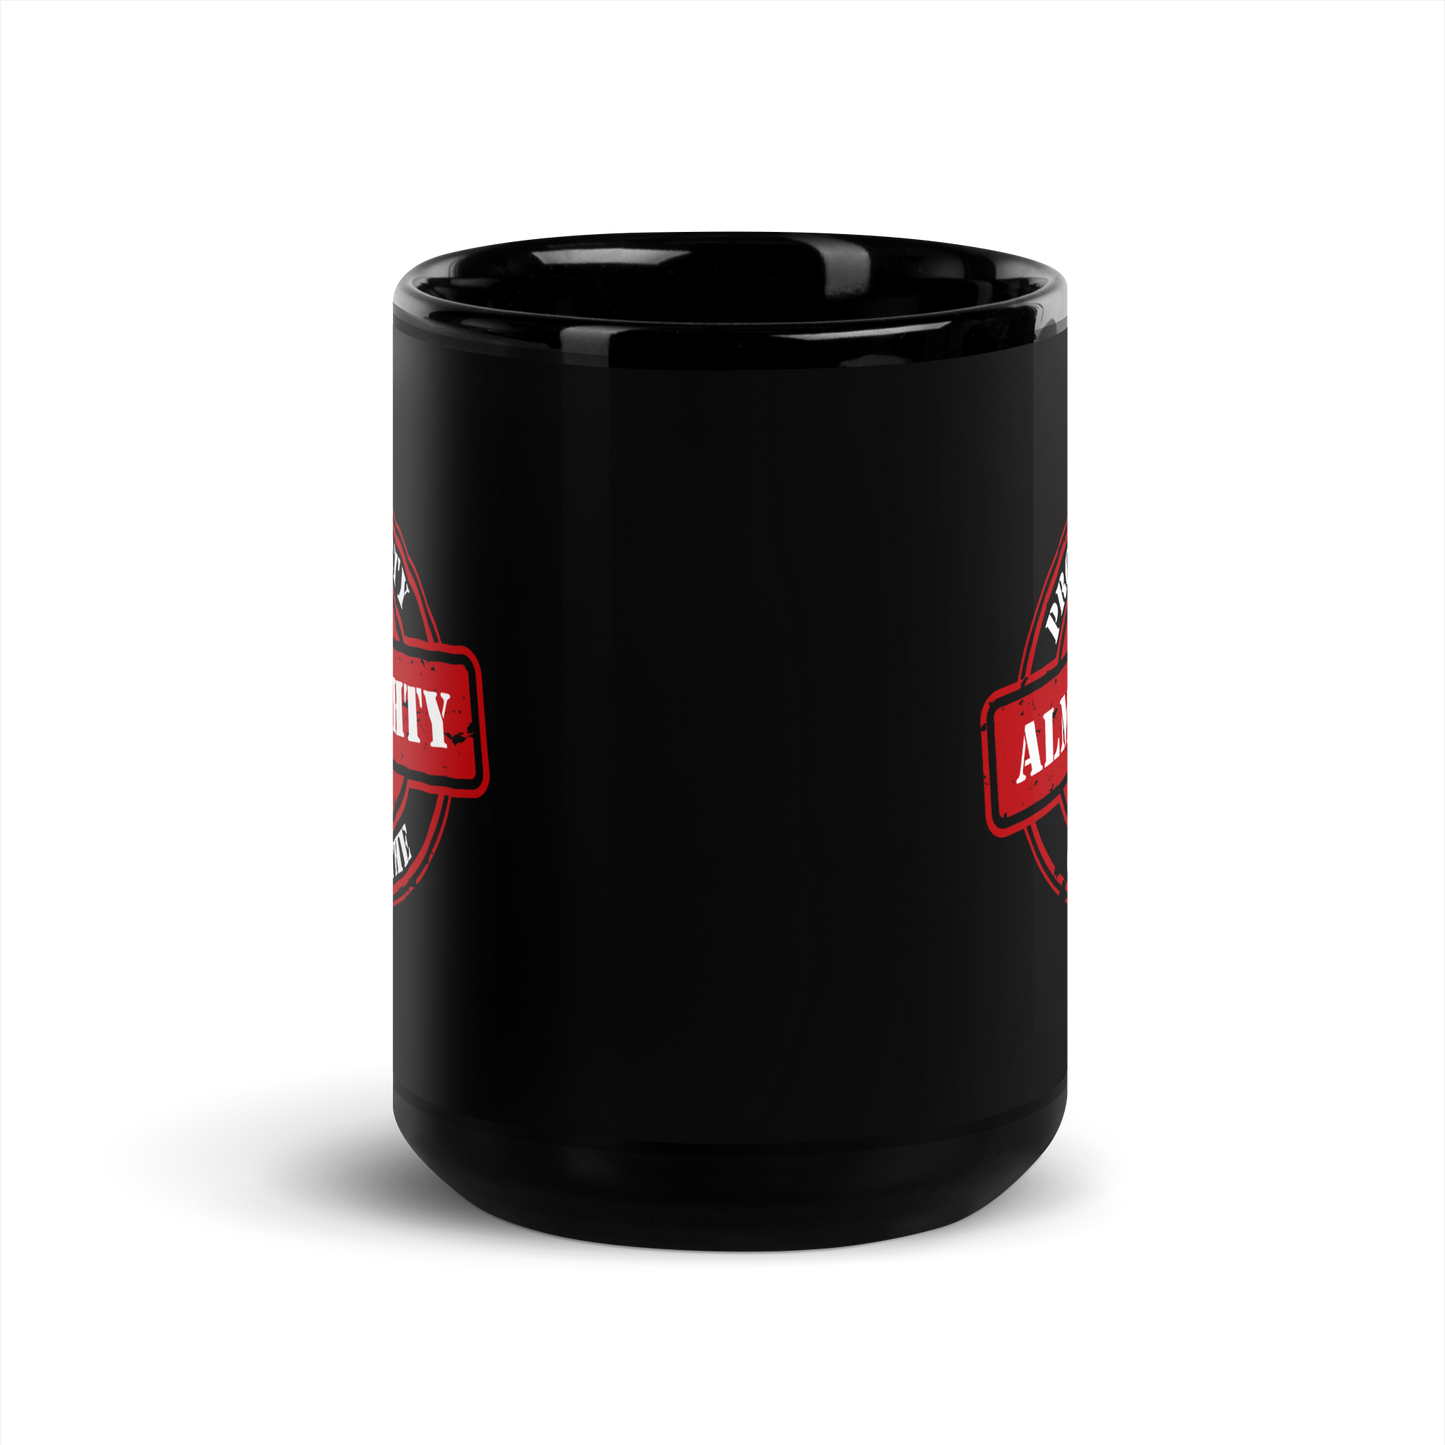 MUG Glossy Black - PROPERTY OF THE ALMIGHTY - White/Red